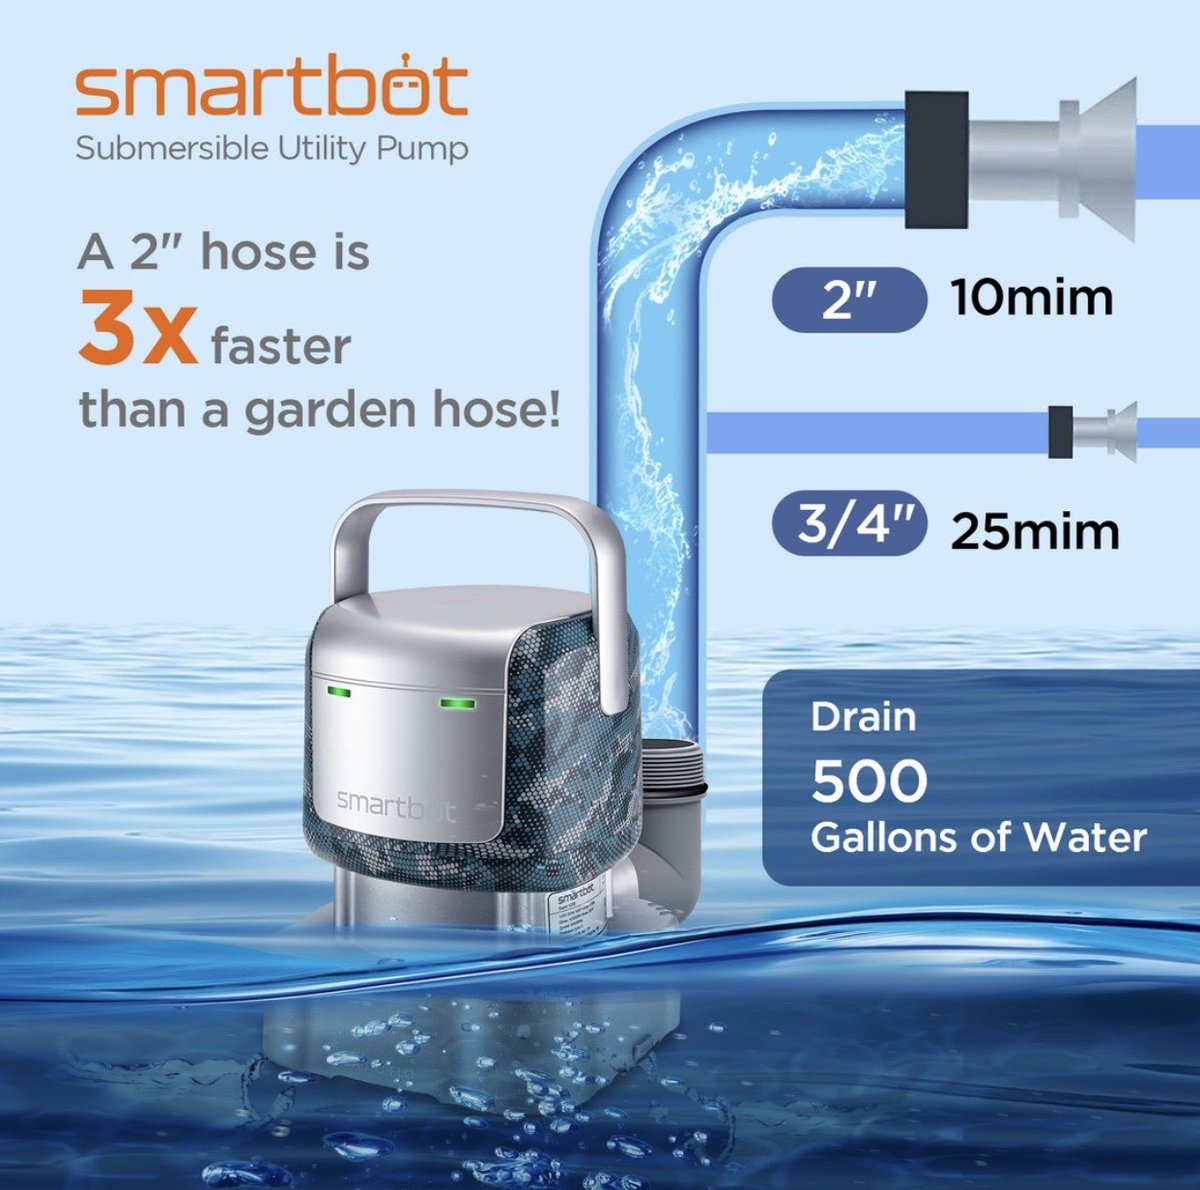 Size really does matter - our Smartbot works 3x faster with a 2” hose compared to a garden hose 🤖🌊
#waterpump #sumppump #poolmaintenance #poolsupplies #home #garden #cleanup #homeowners #springtime